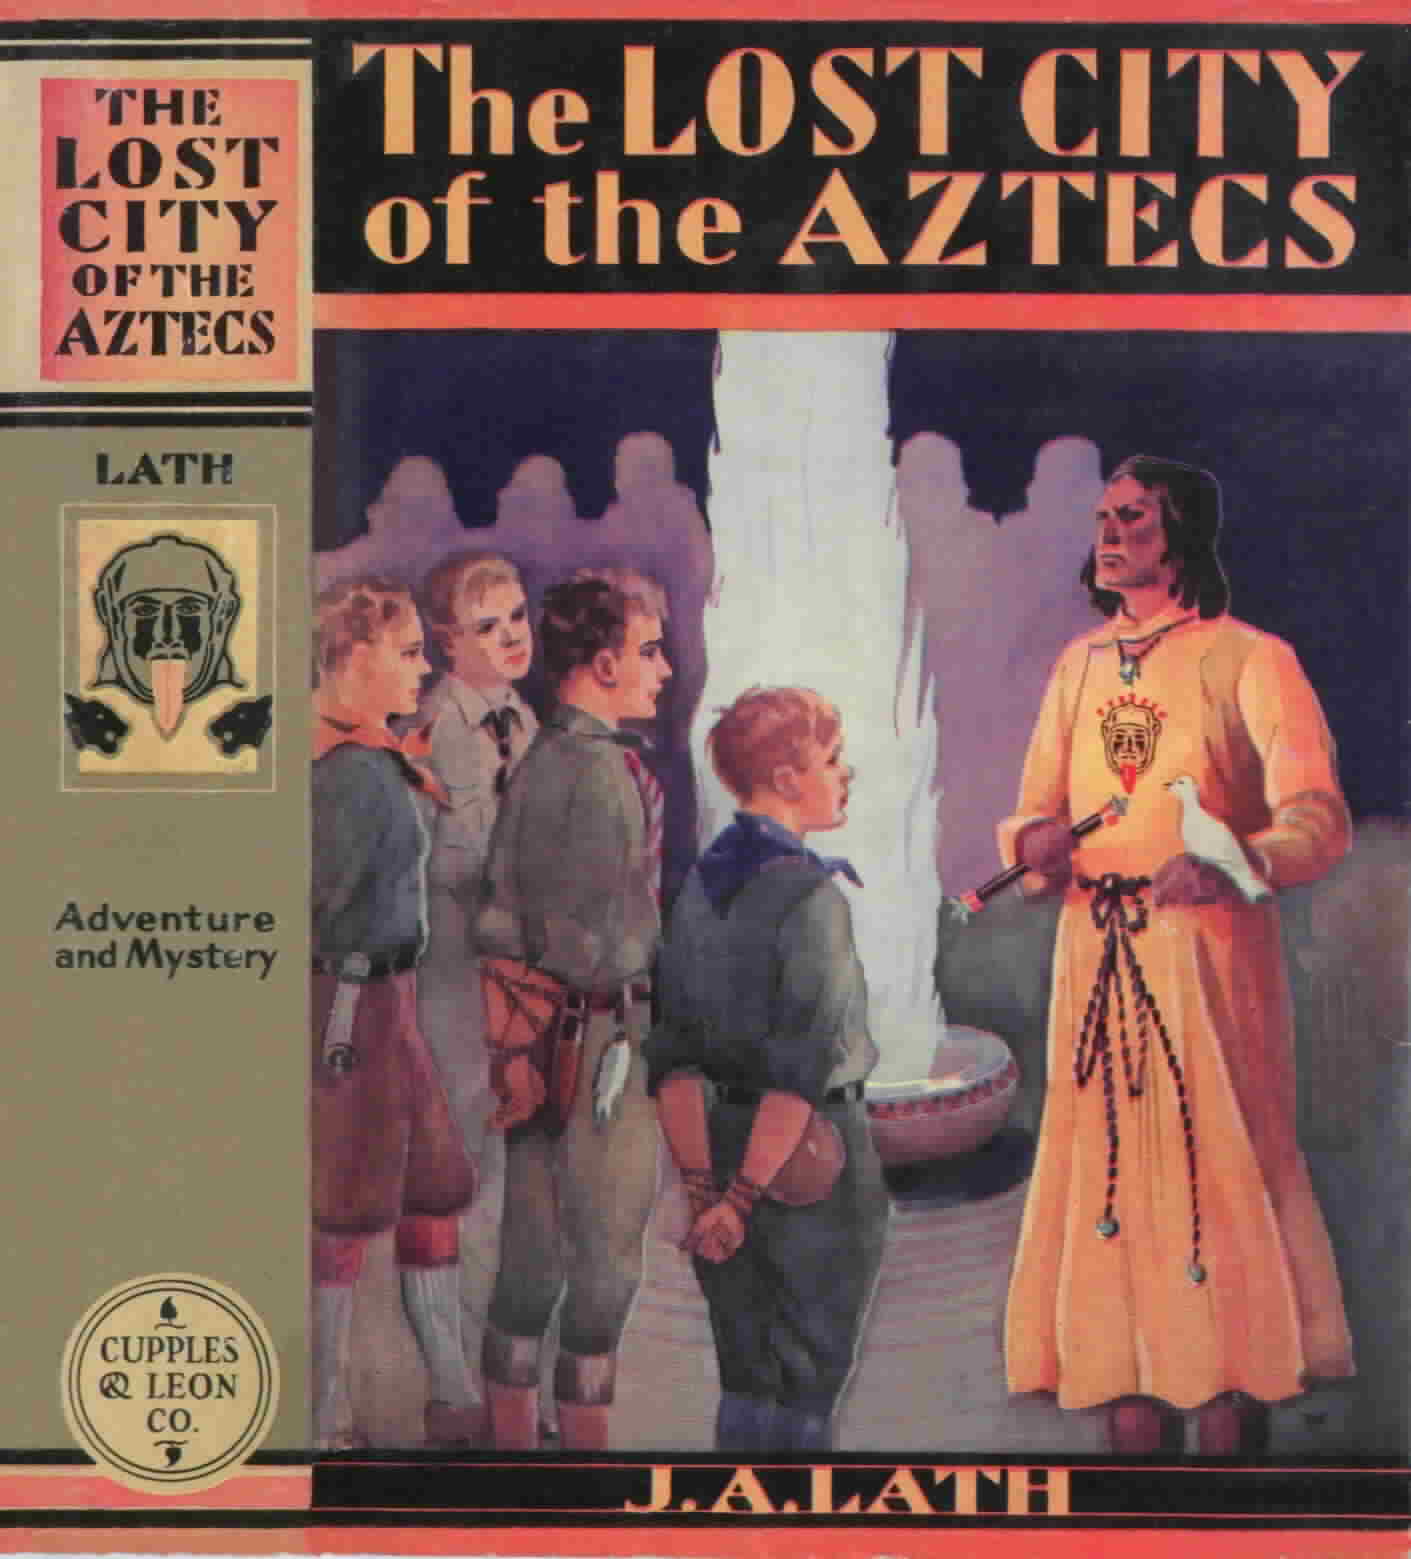 'The Lost City of the Aztecs' by J. A. Lath